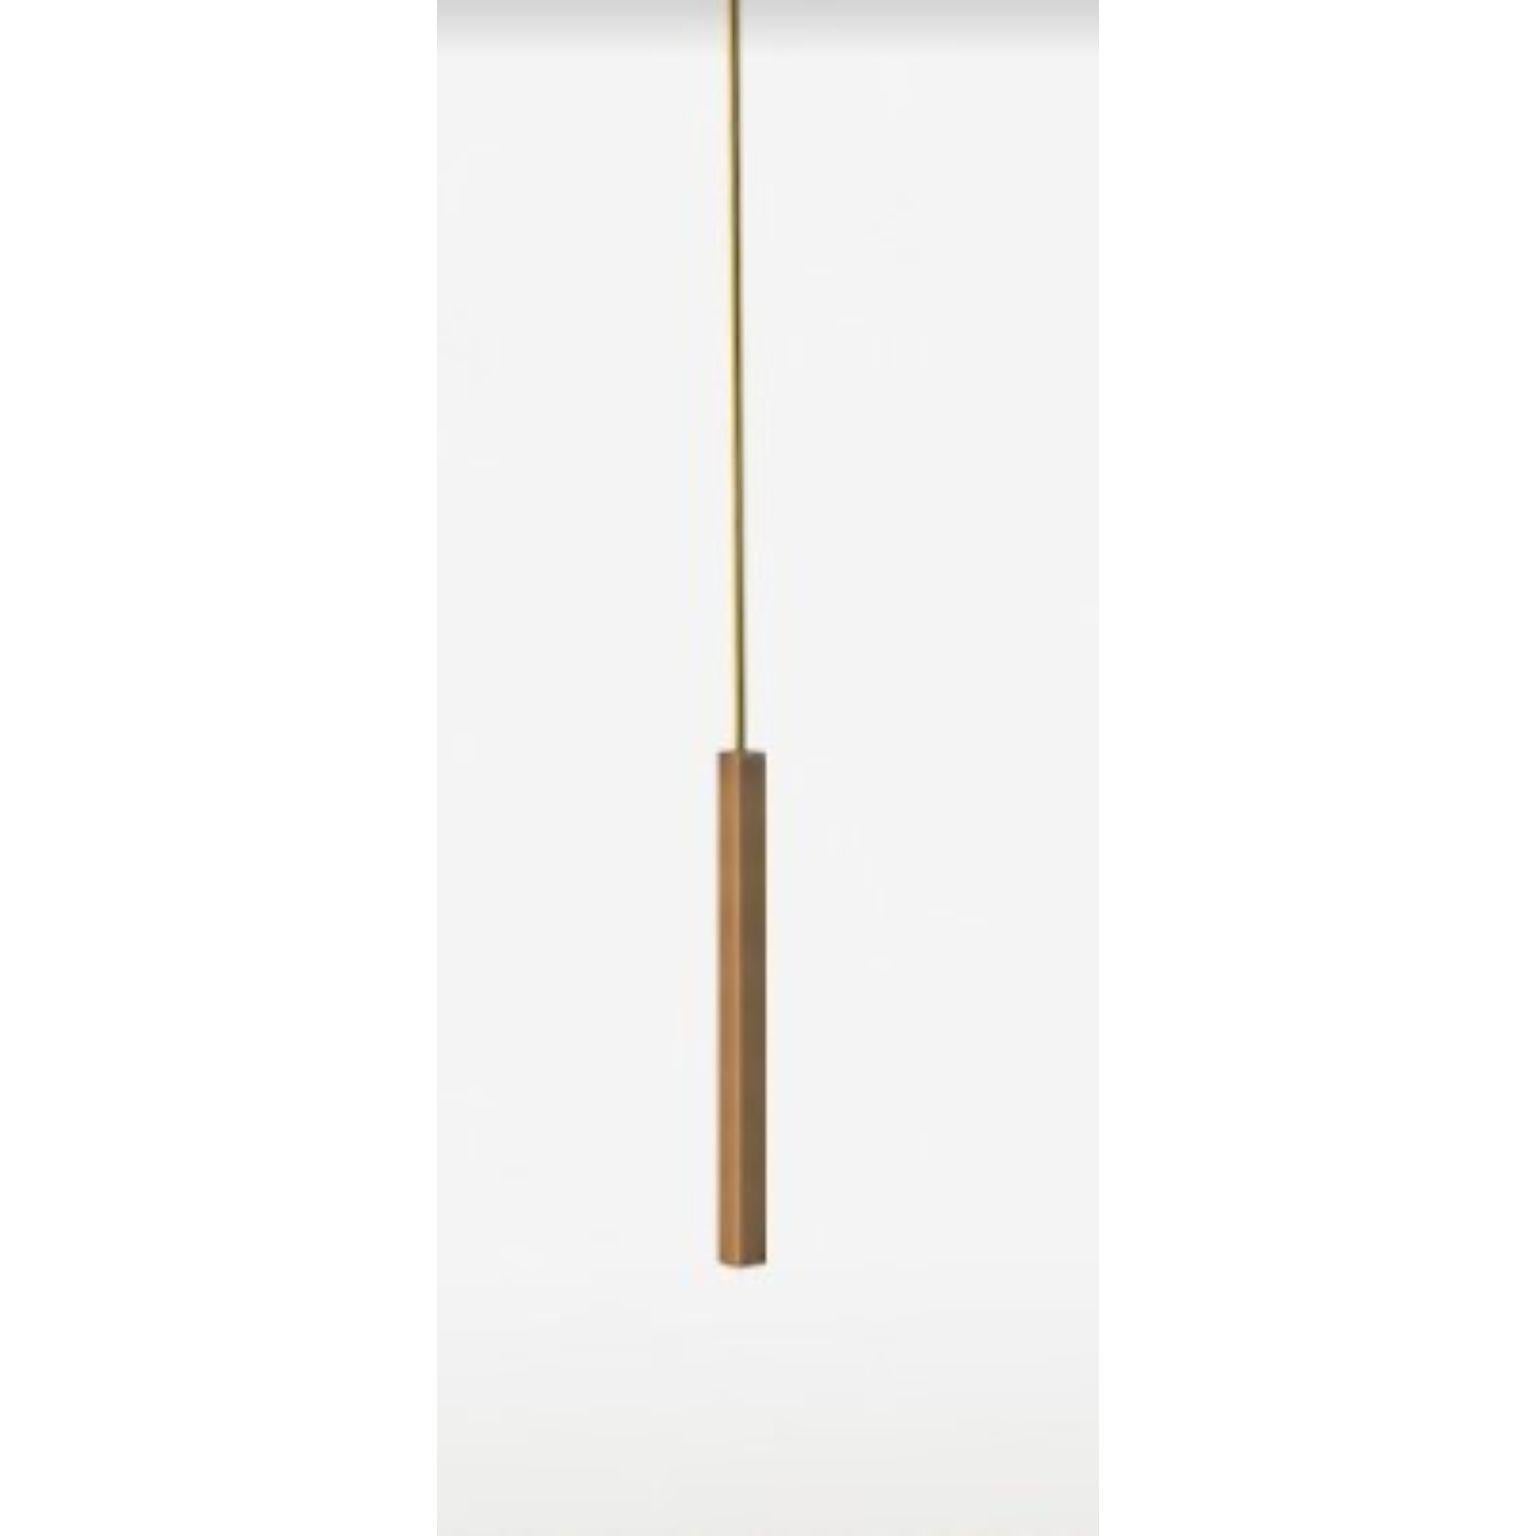 Sira Square Pendant Lamp by Eichkorn
Dimensions: D150 x W1.8 cm
Materials: Brass, patinated in different styles
The length, patina & ceiling mounting can be changed as required.

All our lamps can be wired according to each country. If sold to